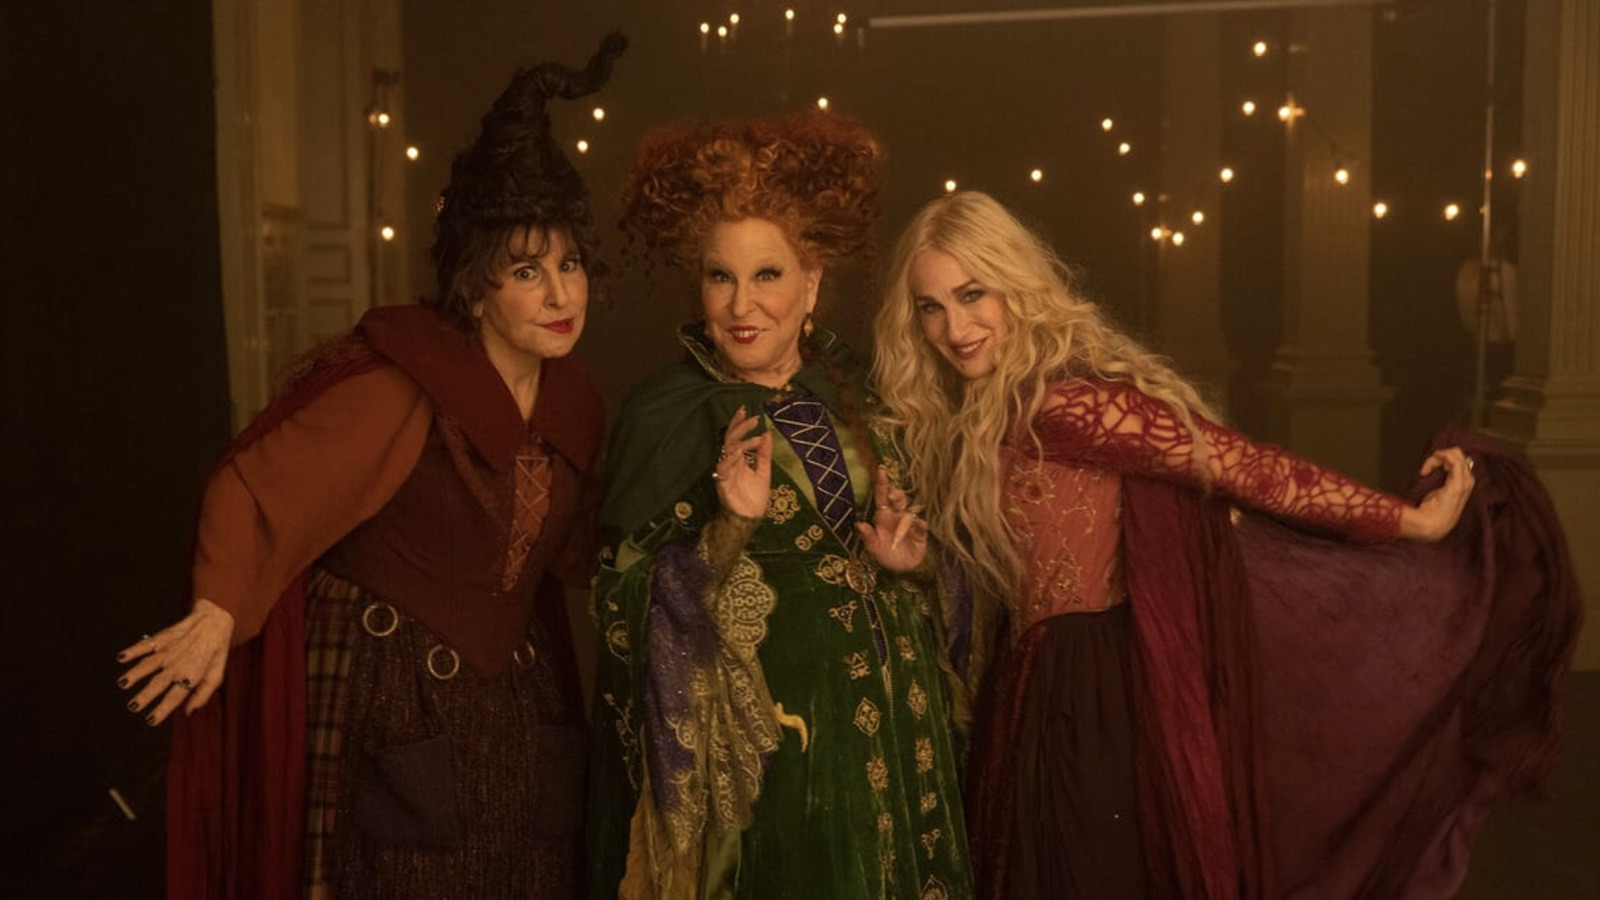 #Hocus Pocus 2 Treats Us To A New Release Date